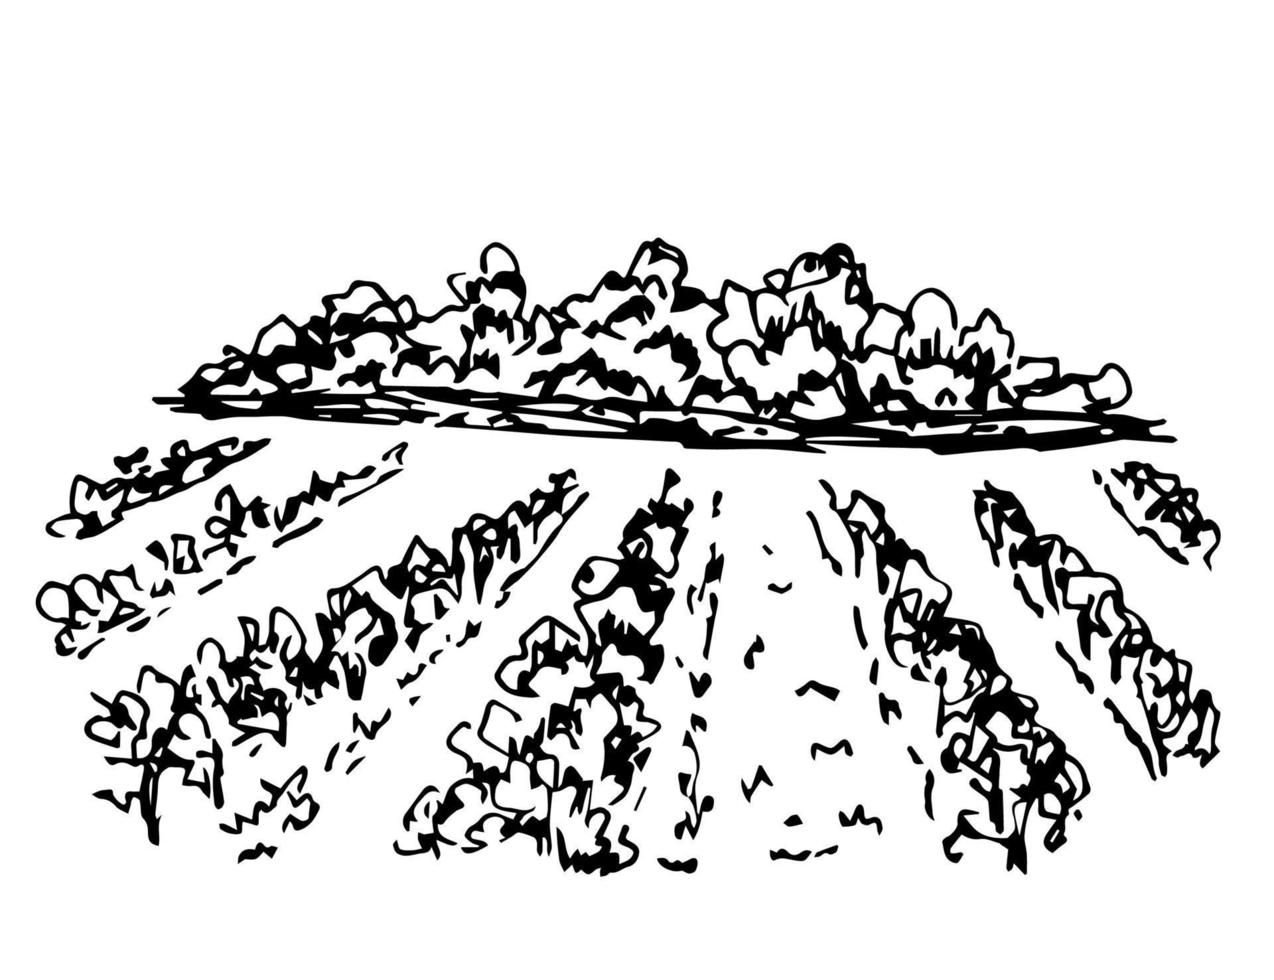 Hand drawn ink simple vector sketch. Vineyard landscape, rows of grape bushes, perspective, trees on the horizon. Engraving style, label printing, wine list, menu, countryside. Growing garden plants.